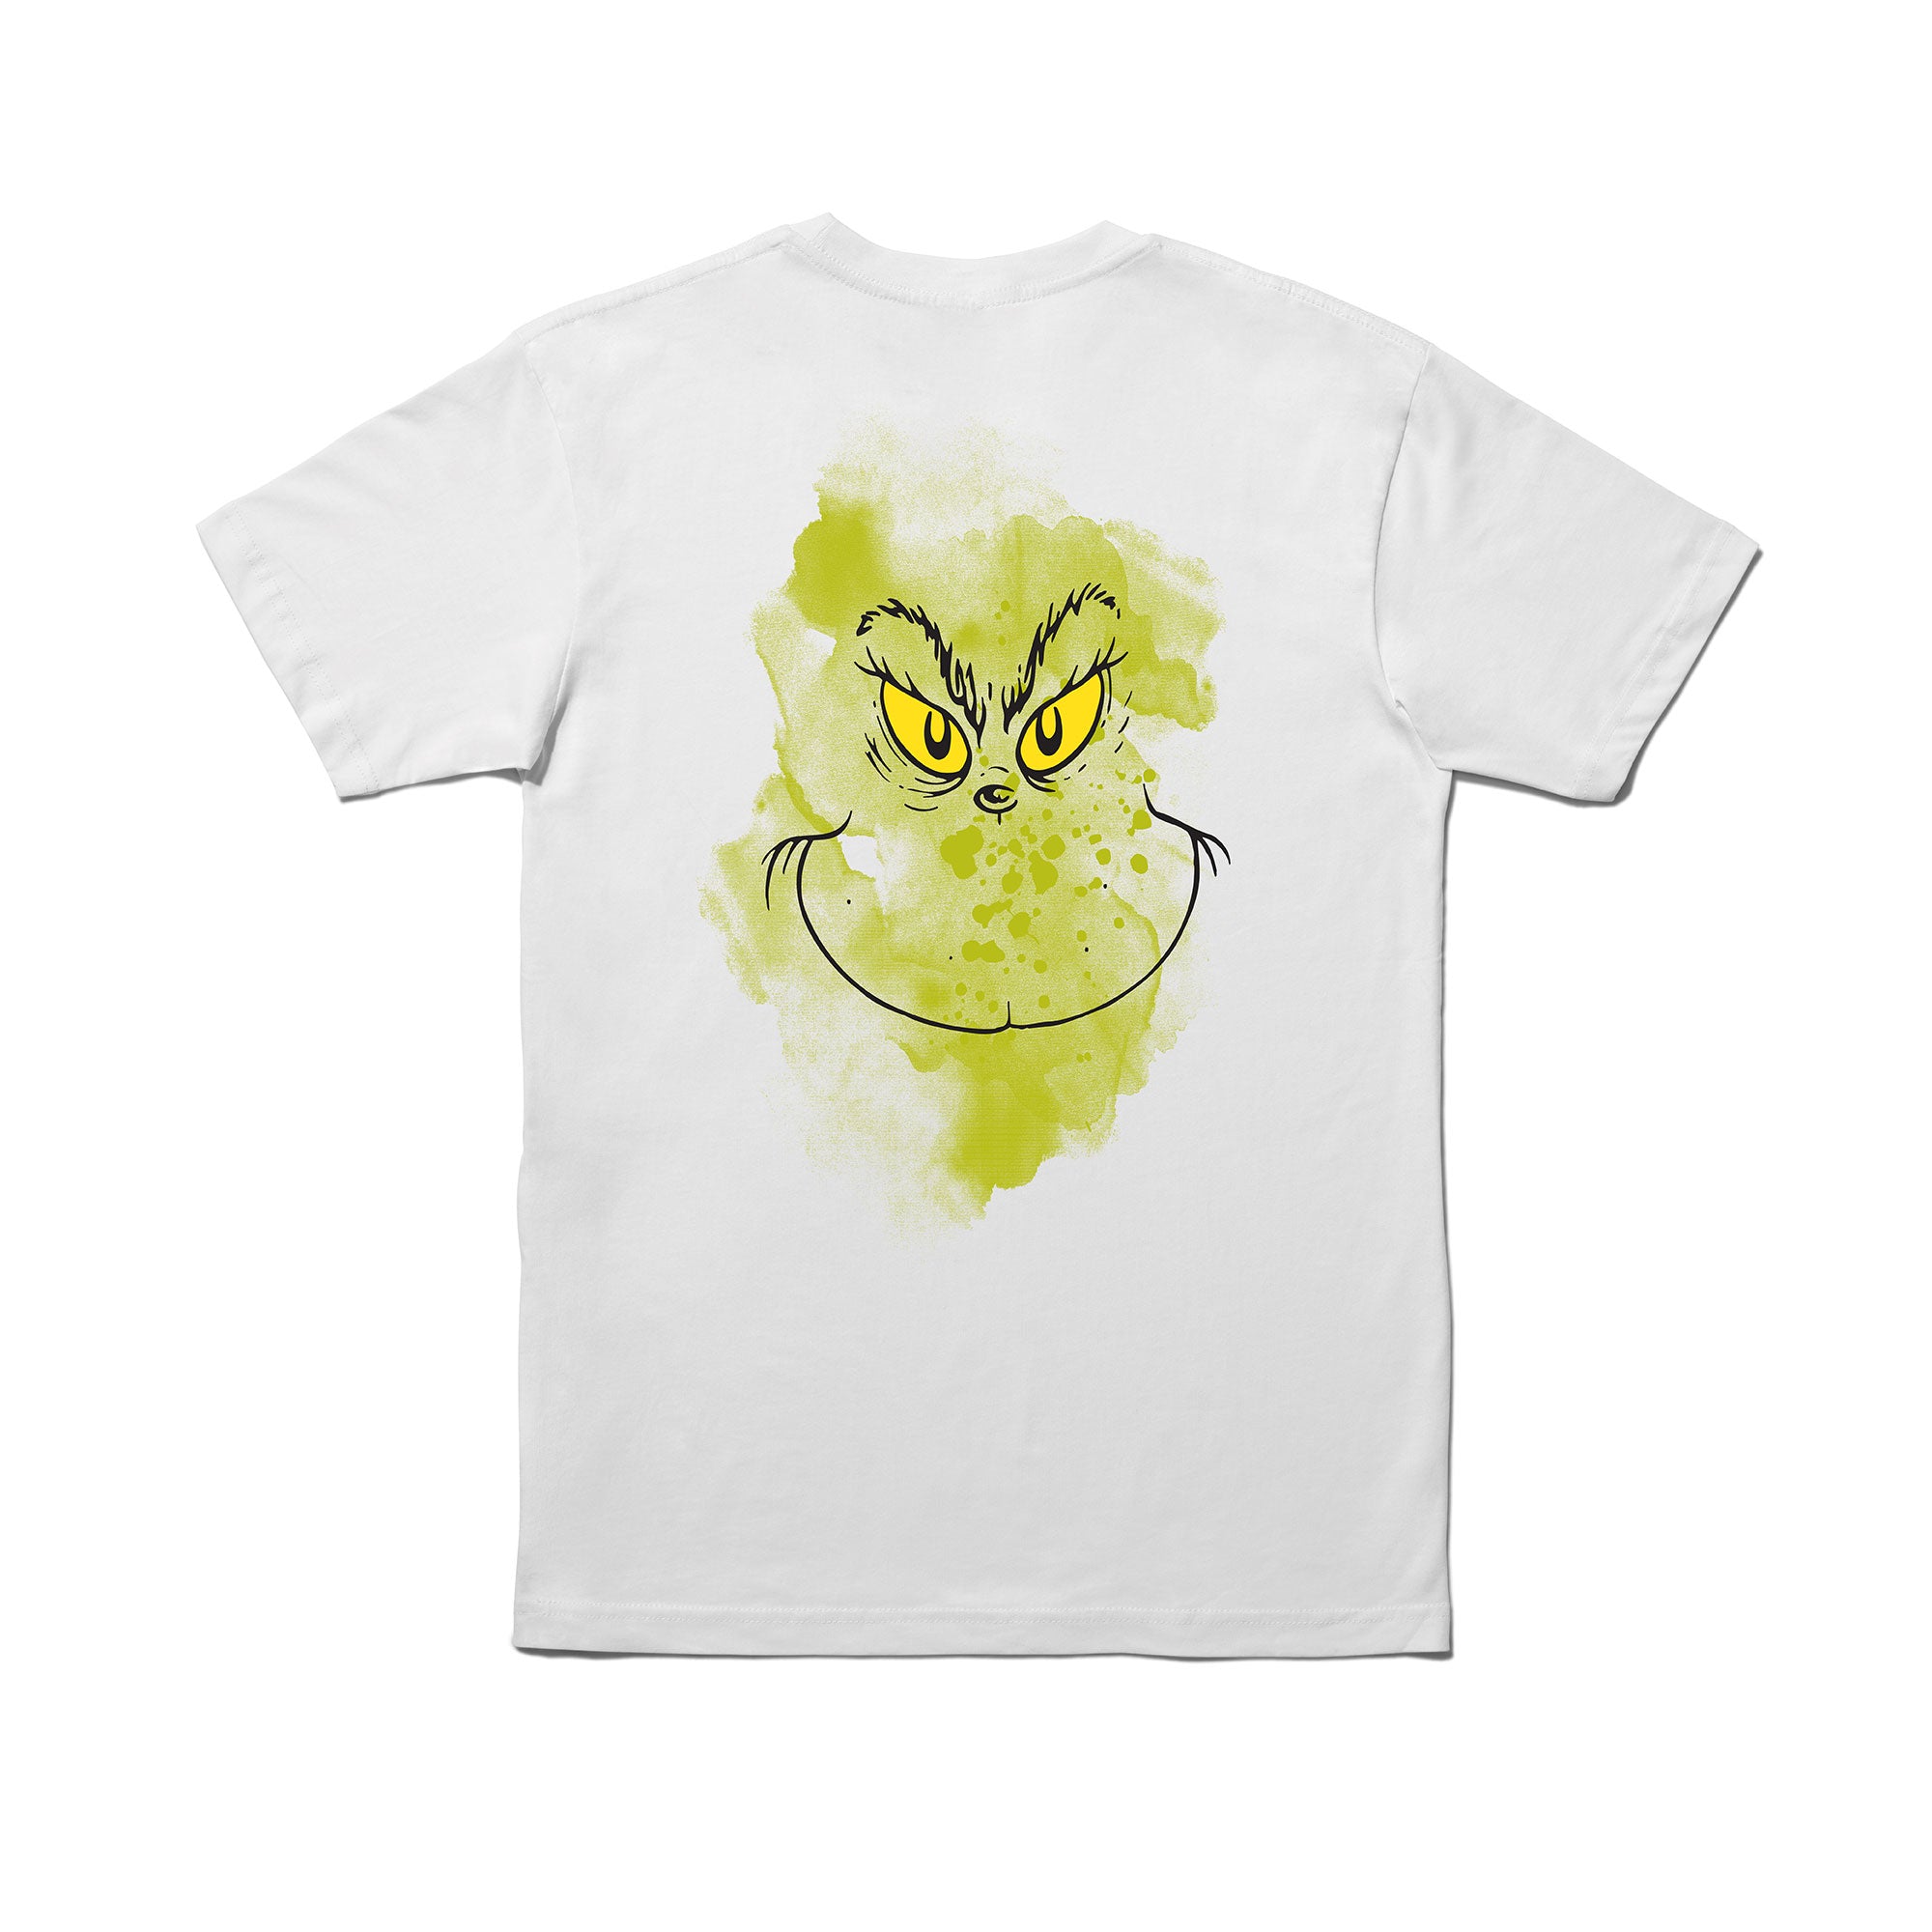 Stance The Grinch SS Tee White XL